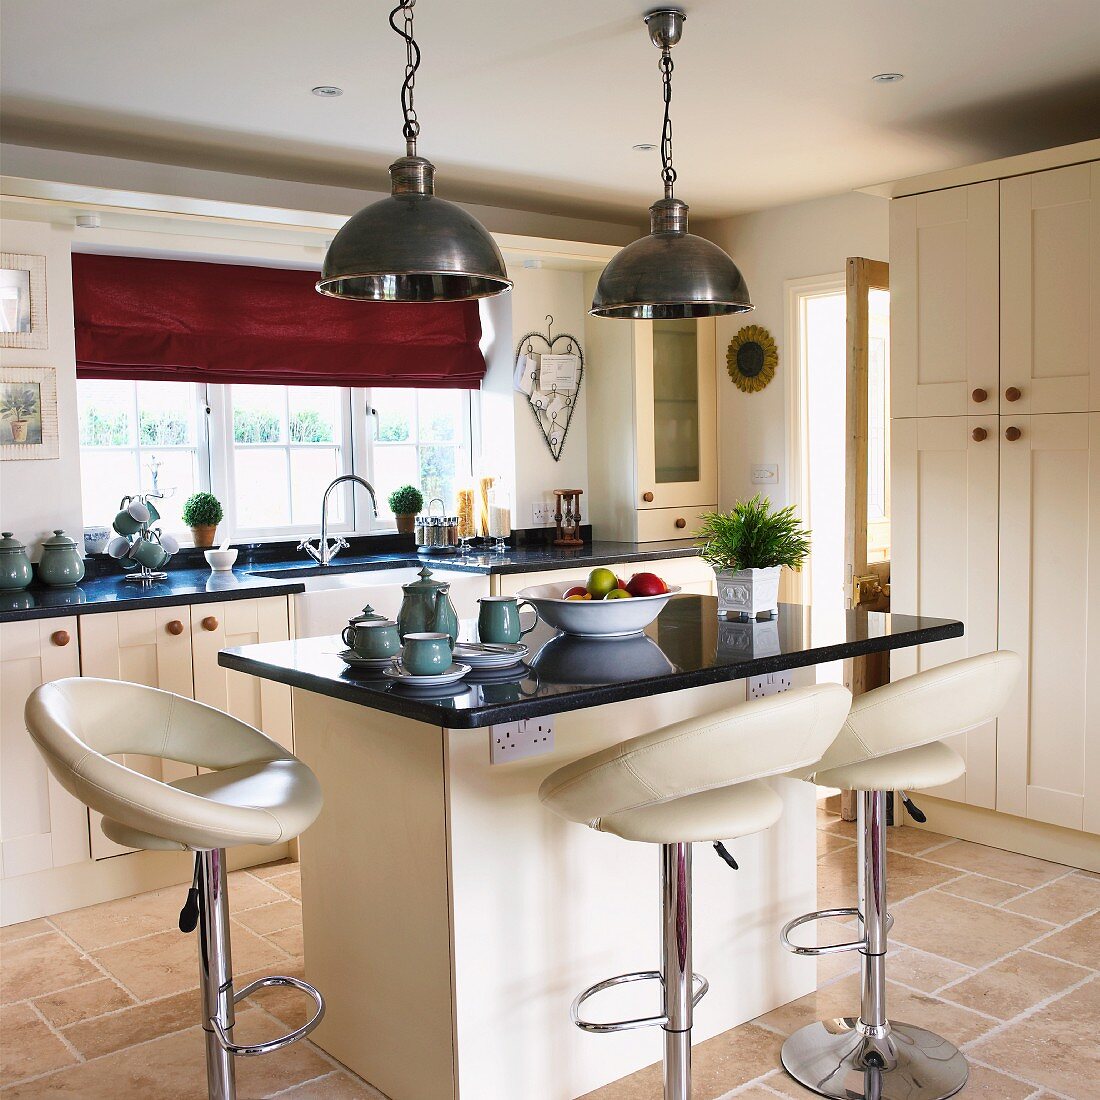 Elegant, cream, country-house kitchen with leather bar stools at breakfast bar